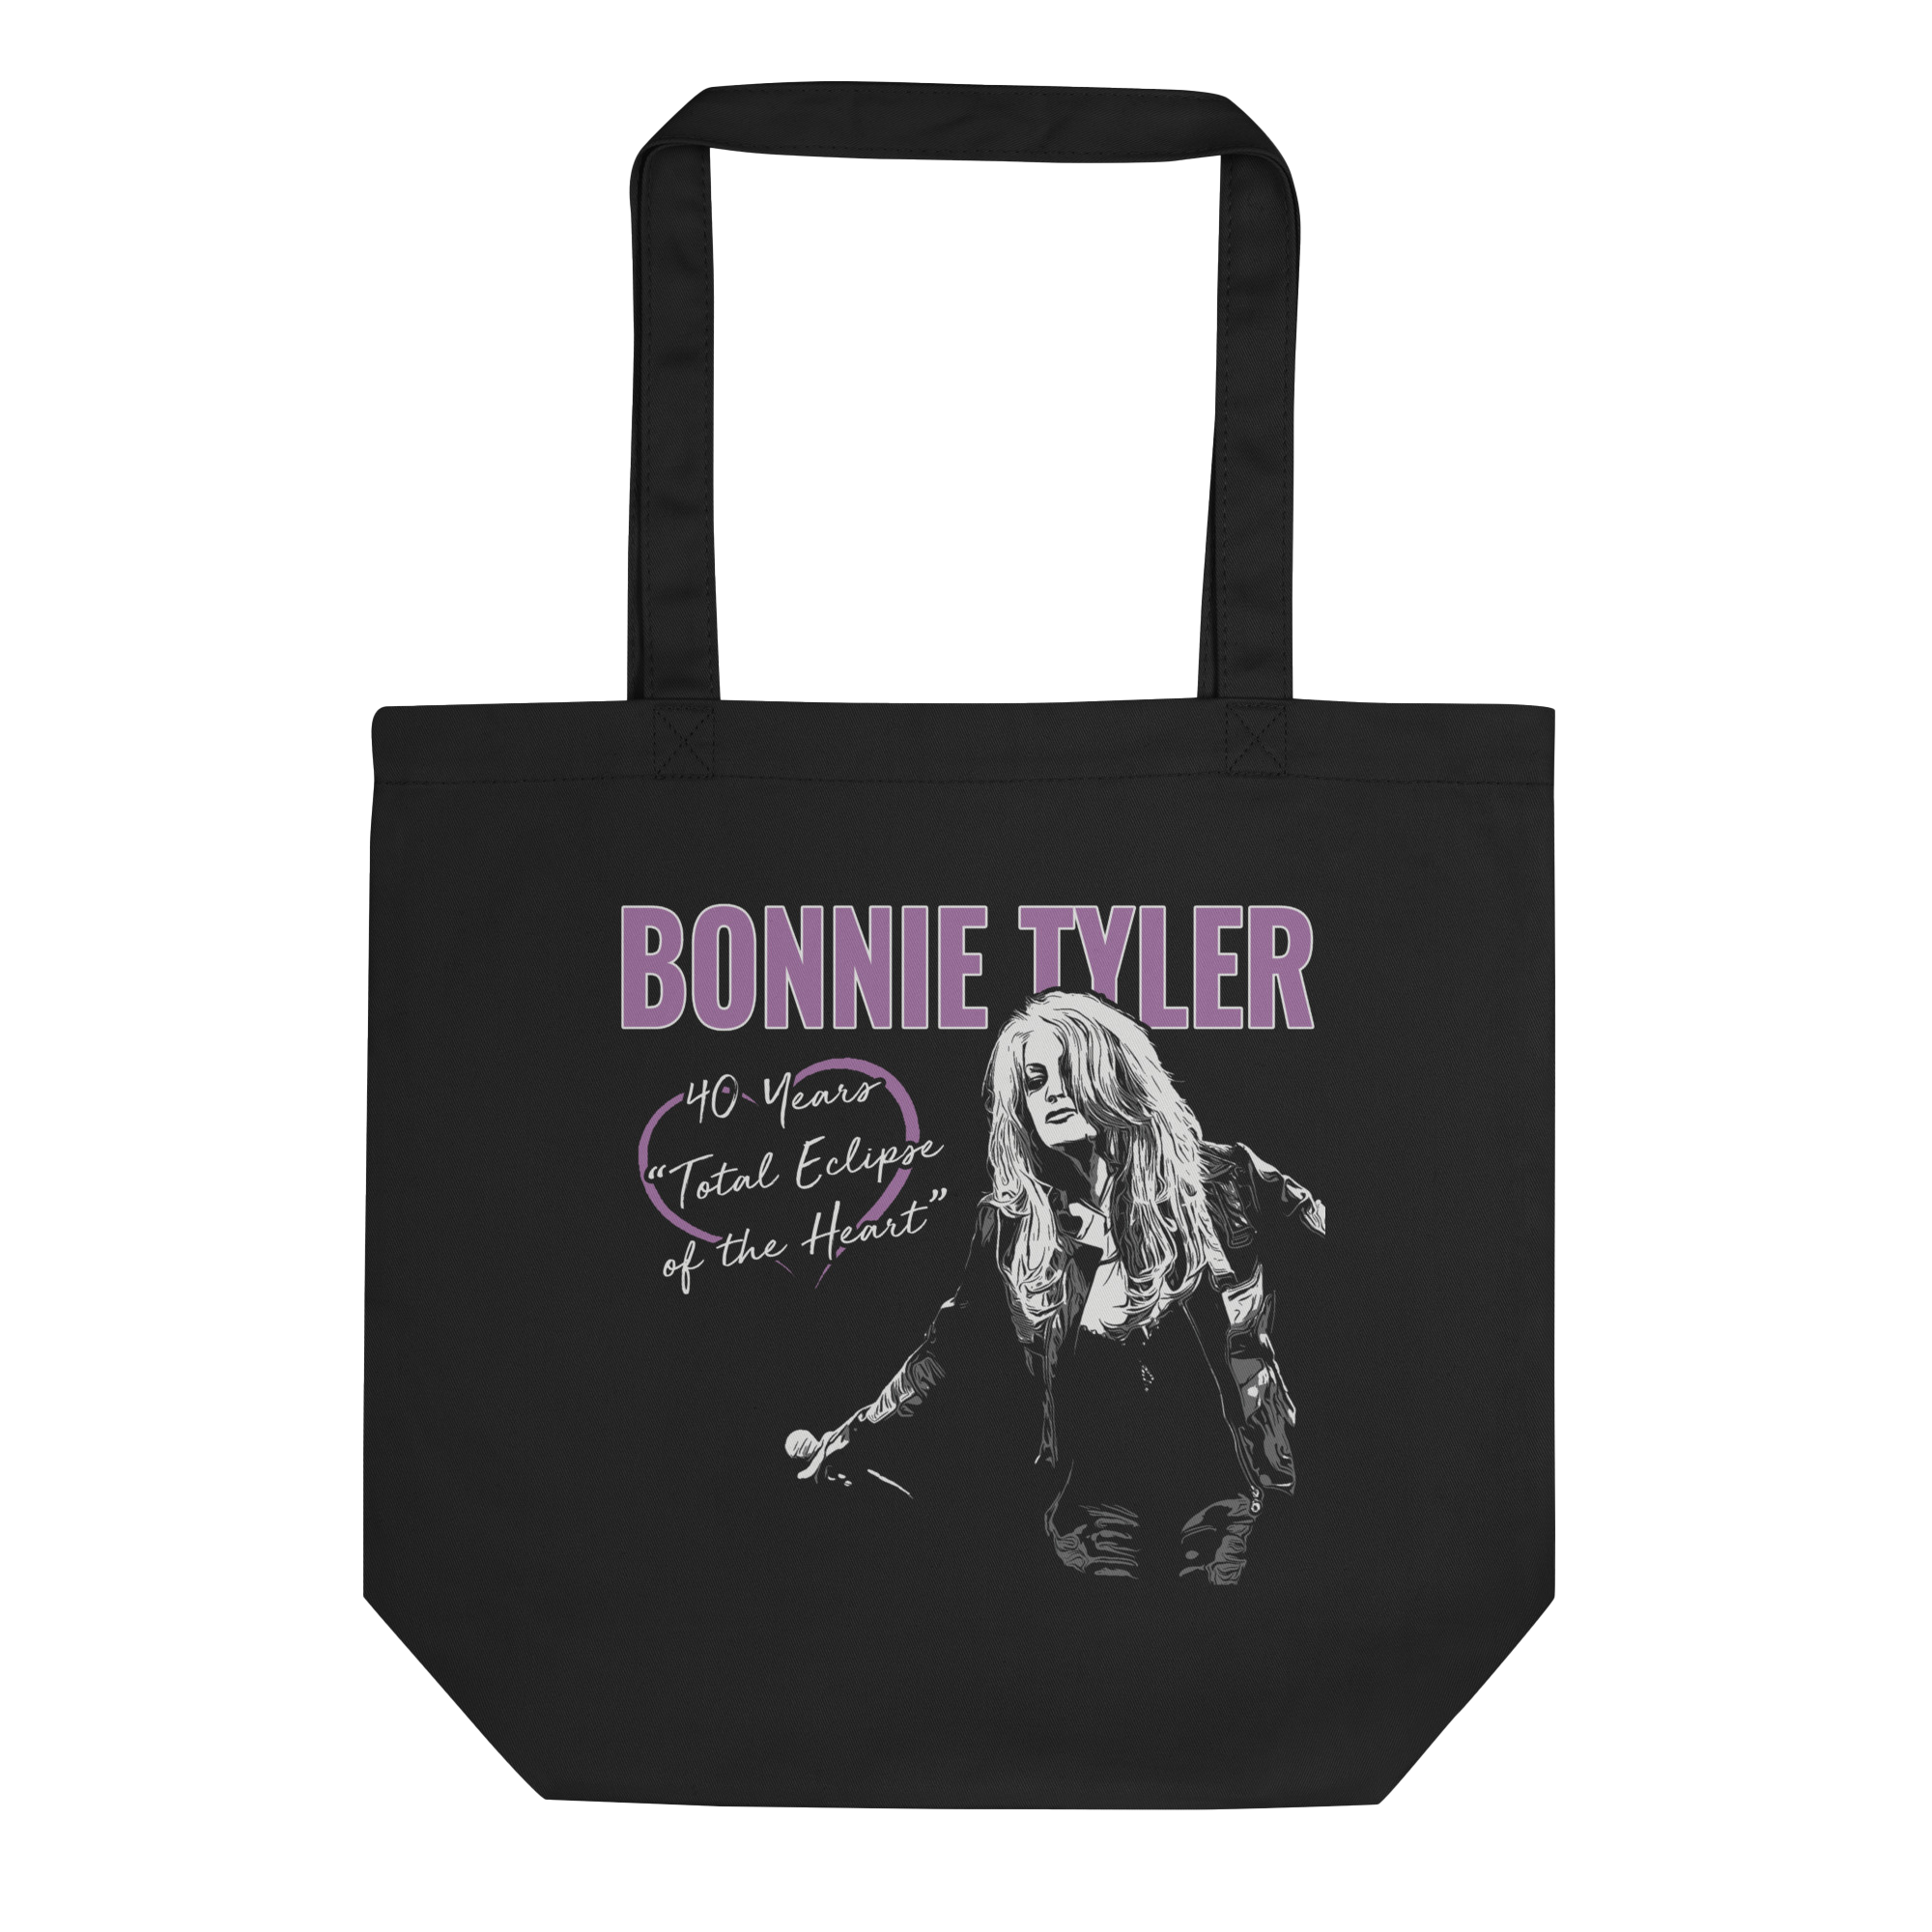 40 Years “Total Eclipse of the Heart” Tour Tote Bag